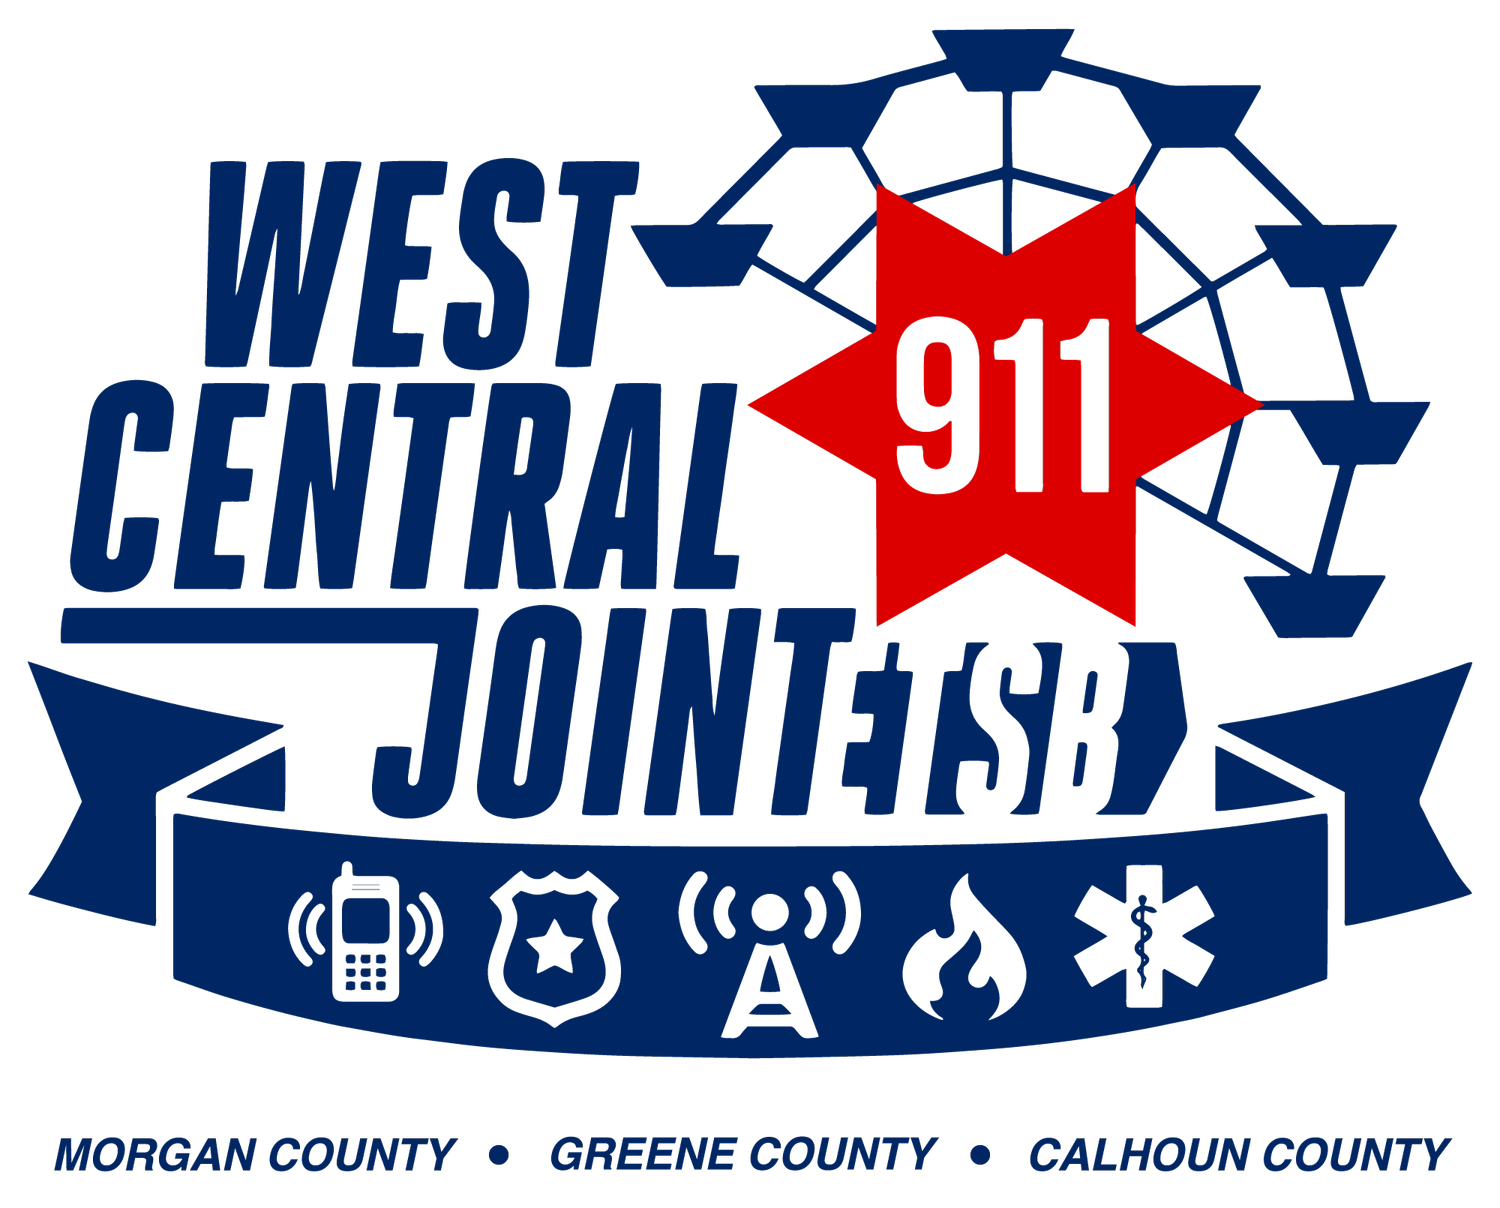 West Central Joint ETSB